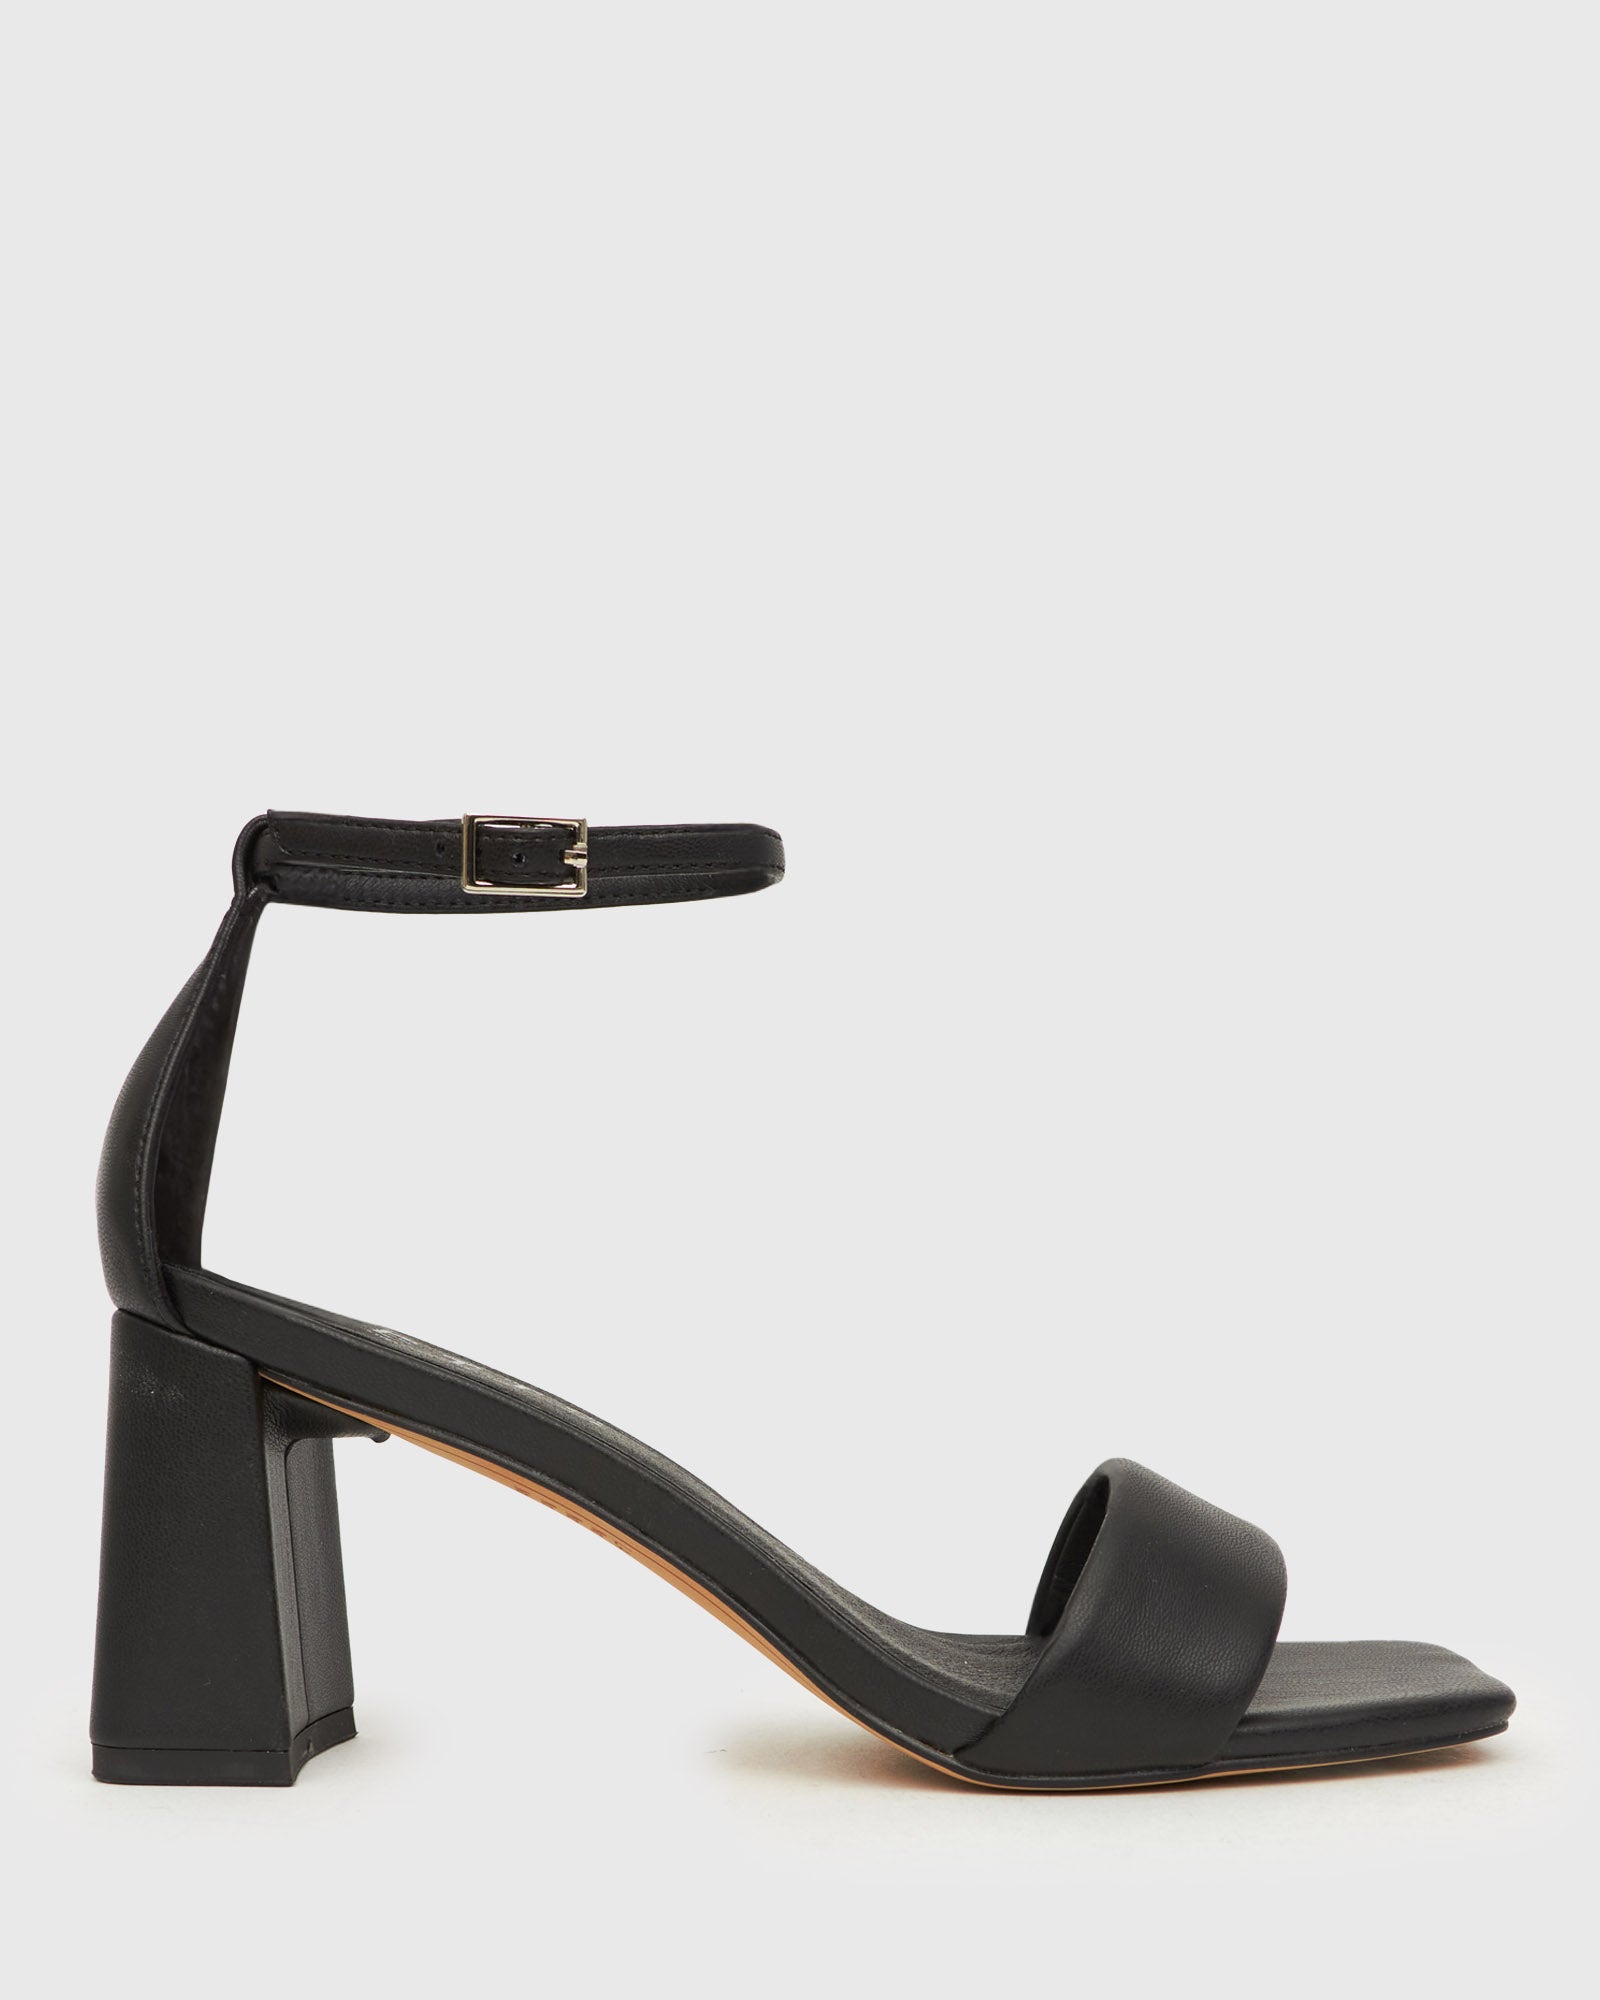 Buy LANA Square Toe Dress Sandals by Betts online - Betts